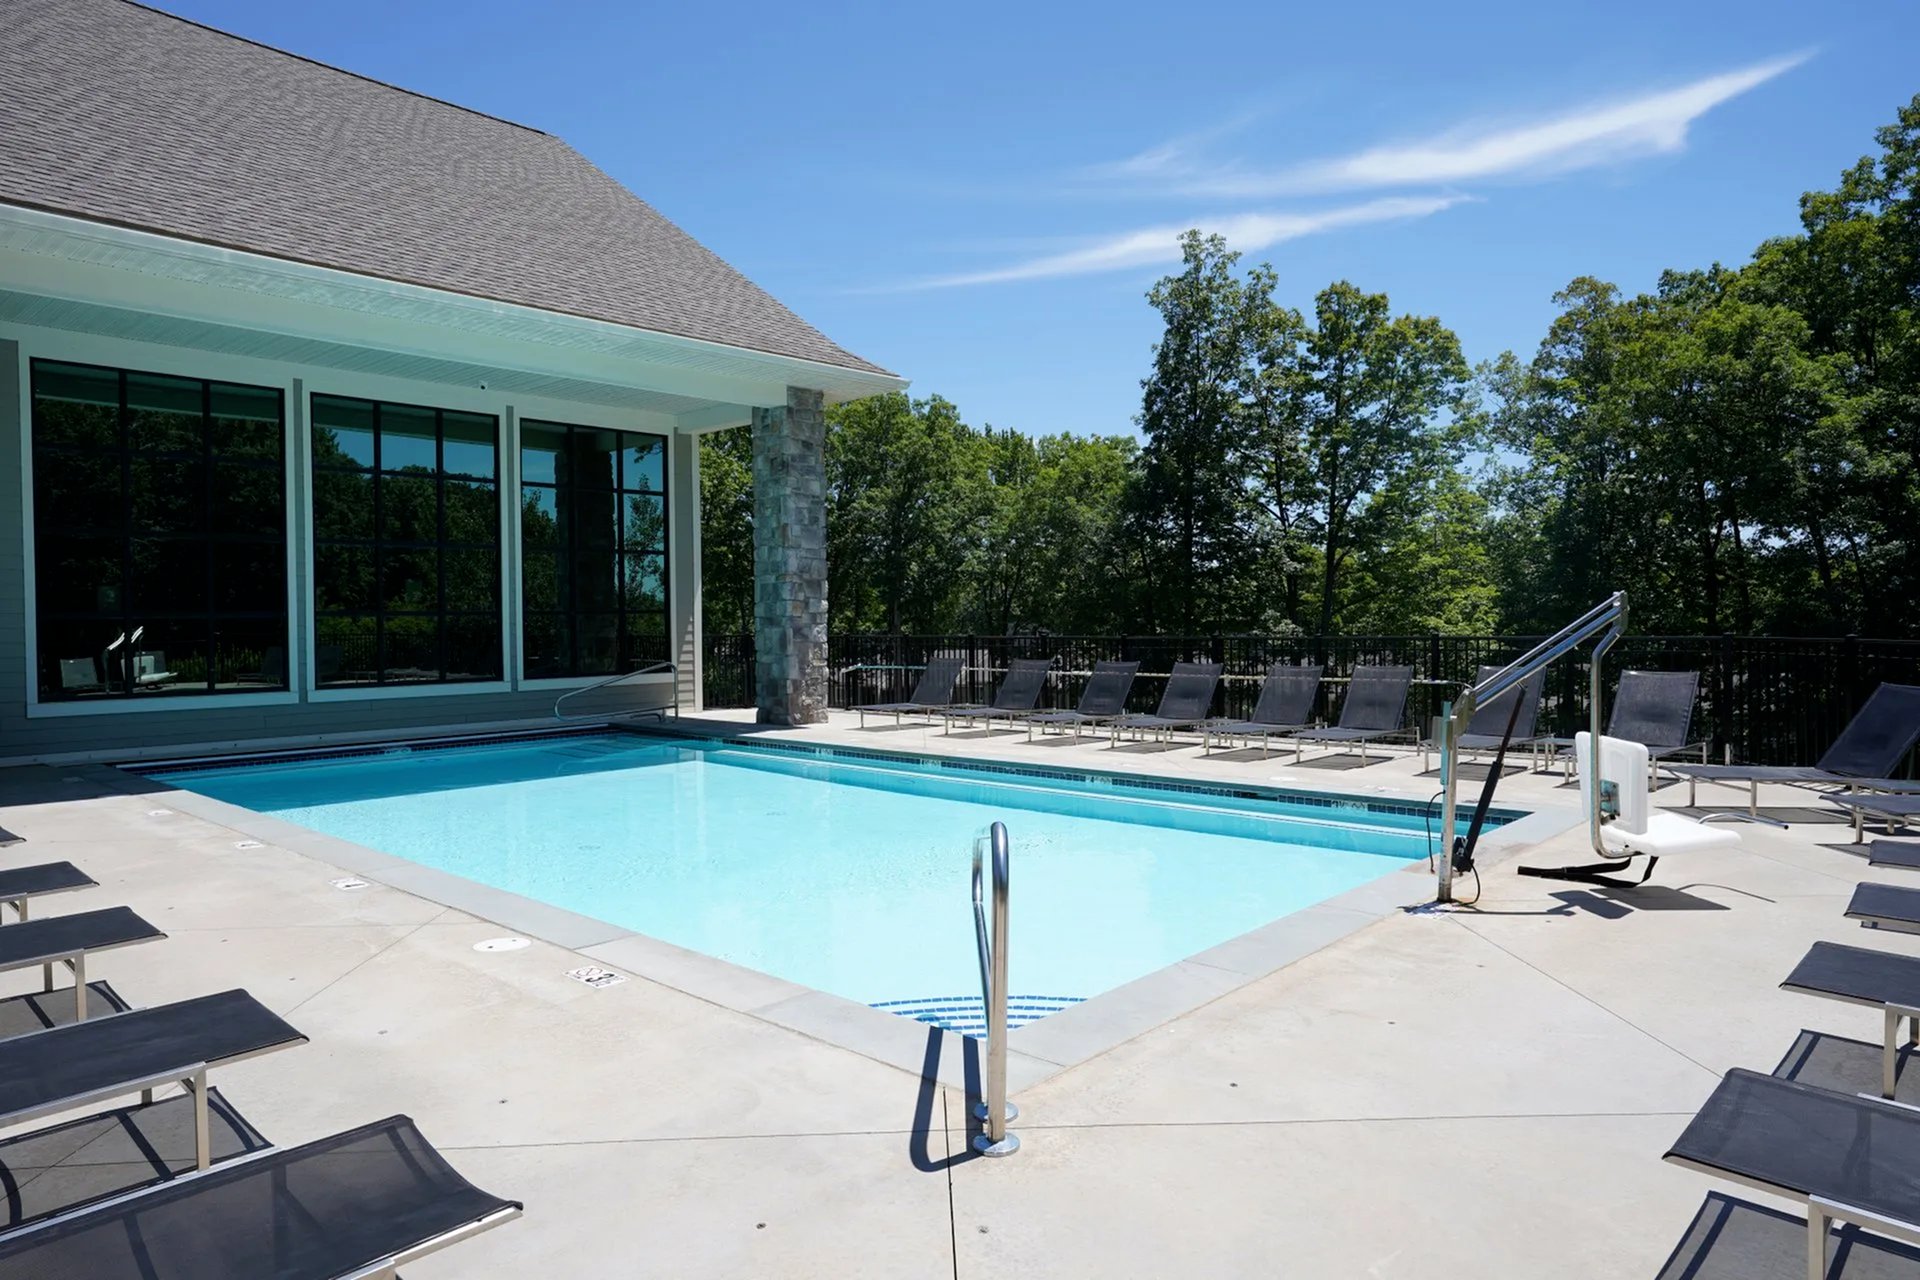 State College, PA Apartments For Rent - Toftrees - Blue Pool with Poolside Seating, Gated Entry, and Surrounding Trees